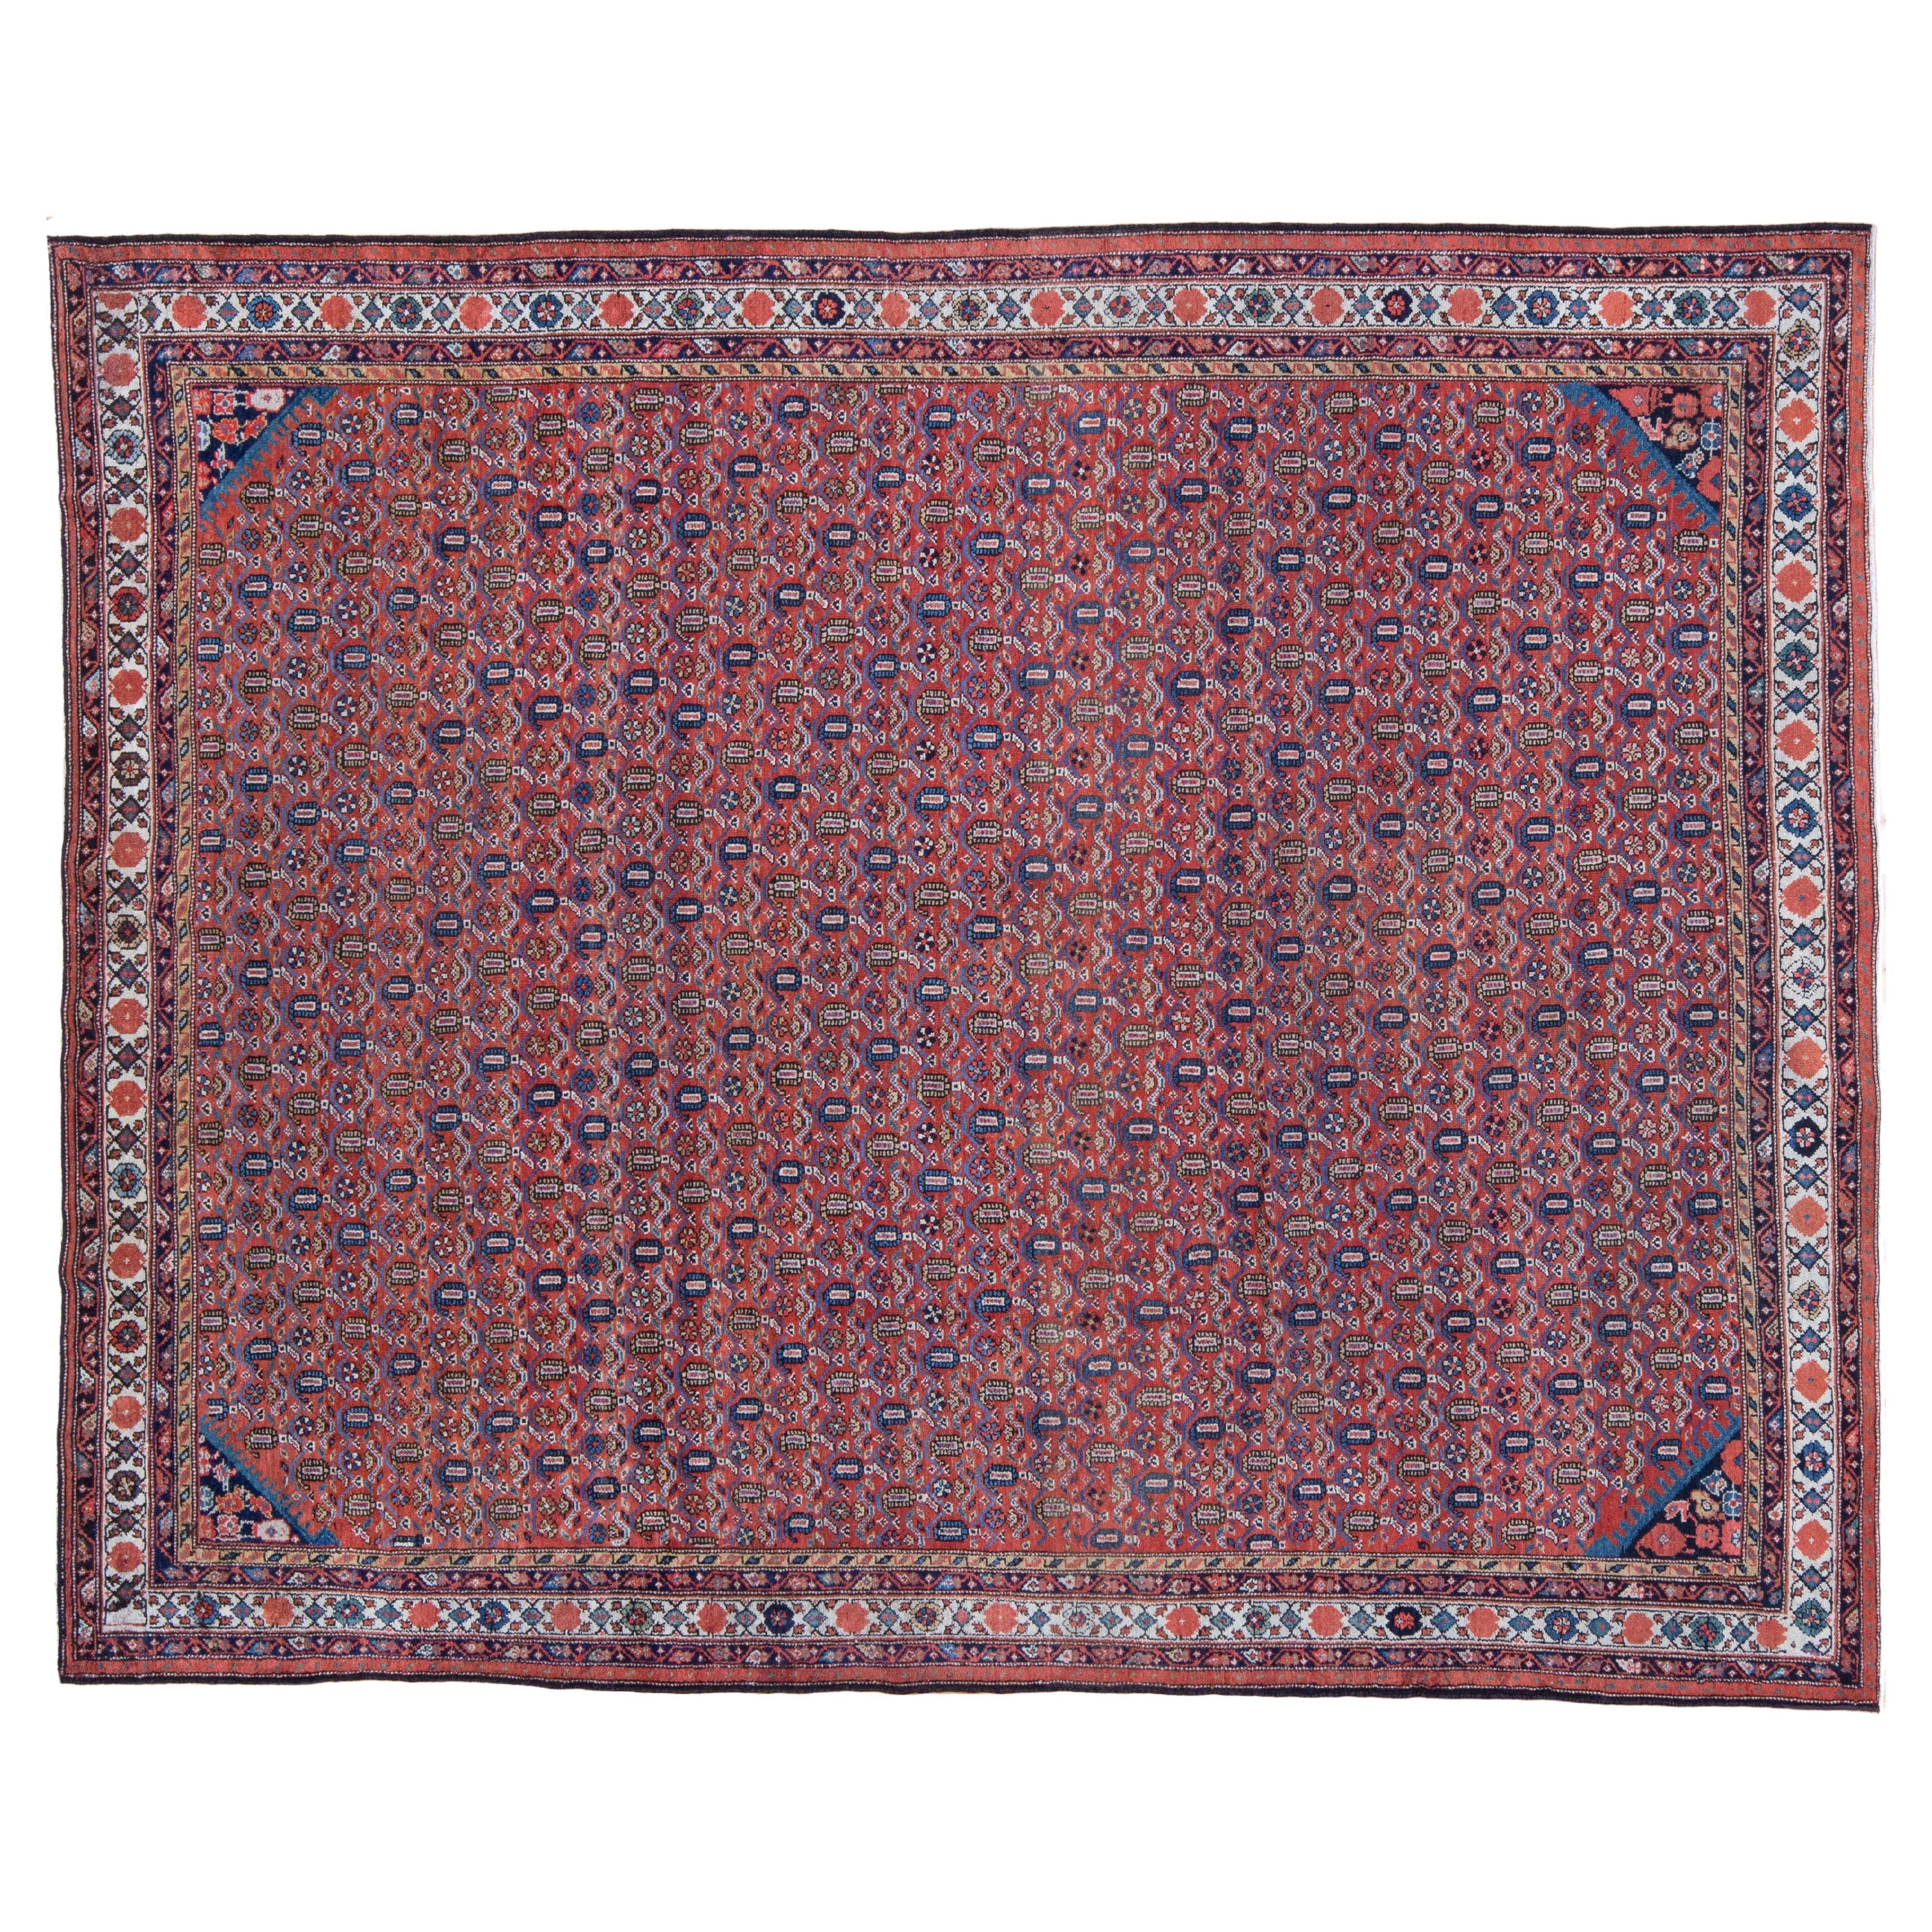 Antique Persian Malayer Large Red Boteh Rug, Early 20th Century  For Sale